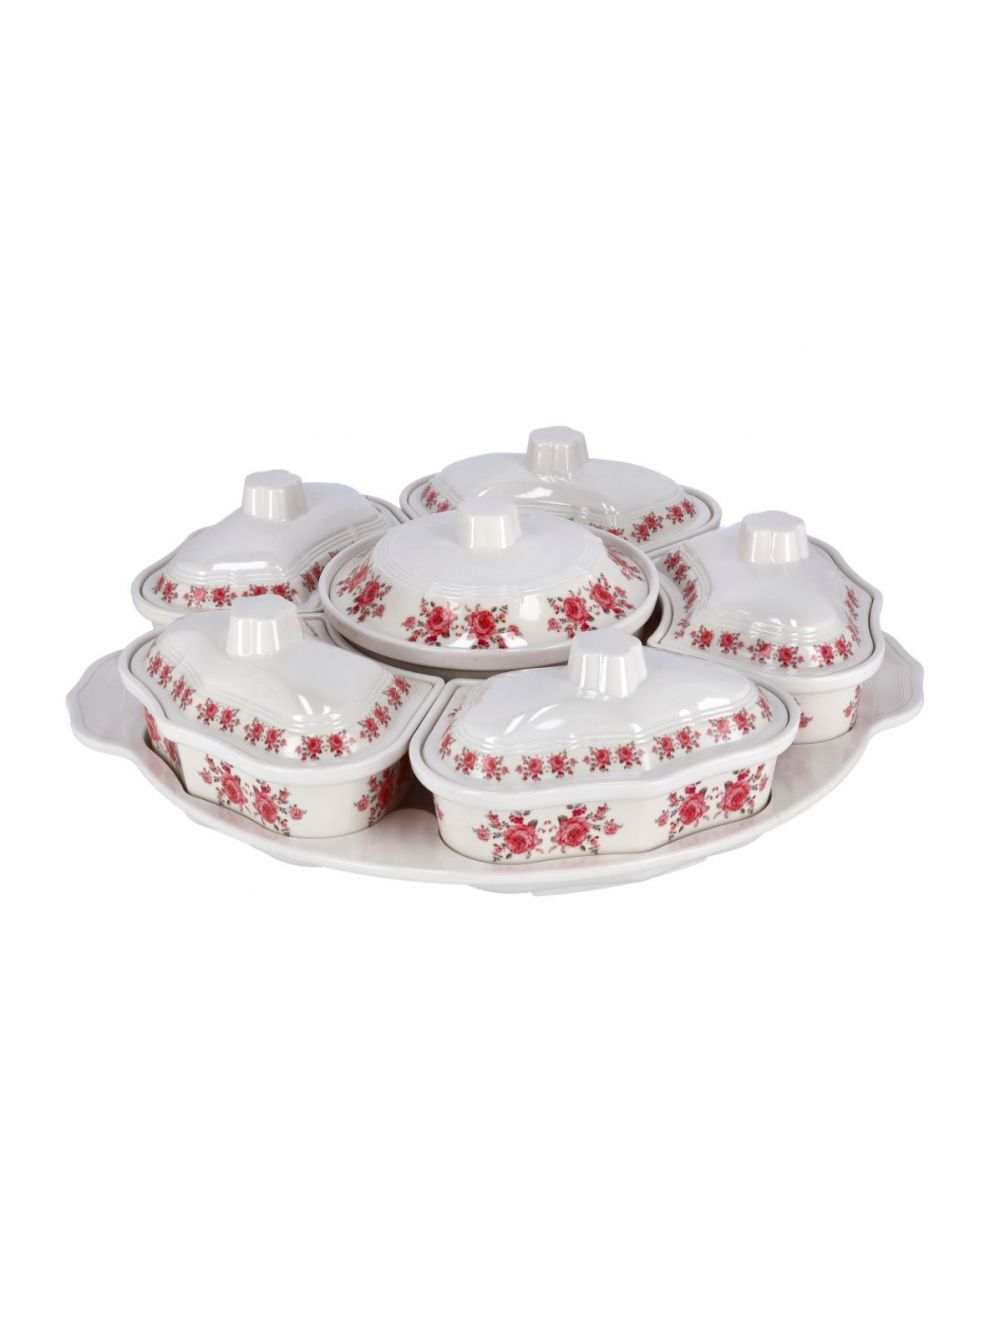 Royalford 14Pcs Revolving Serving Tray - Appetizer and Condiment Server Divided Serving Dishes with Lids |  Perfect for Chips, Dip, Veggies, Curries, Candy, Snacks & More